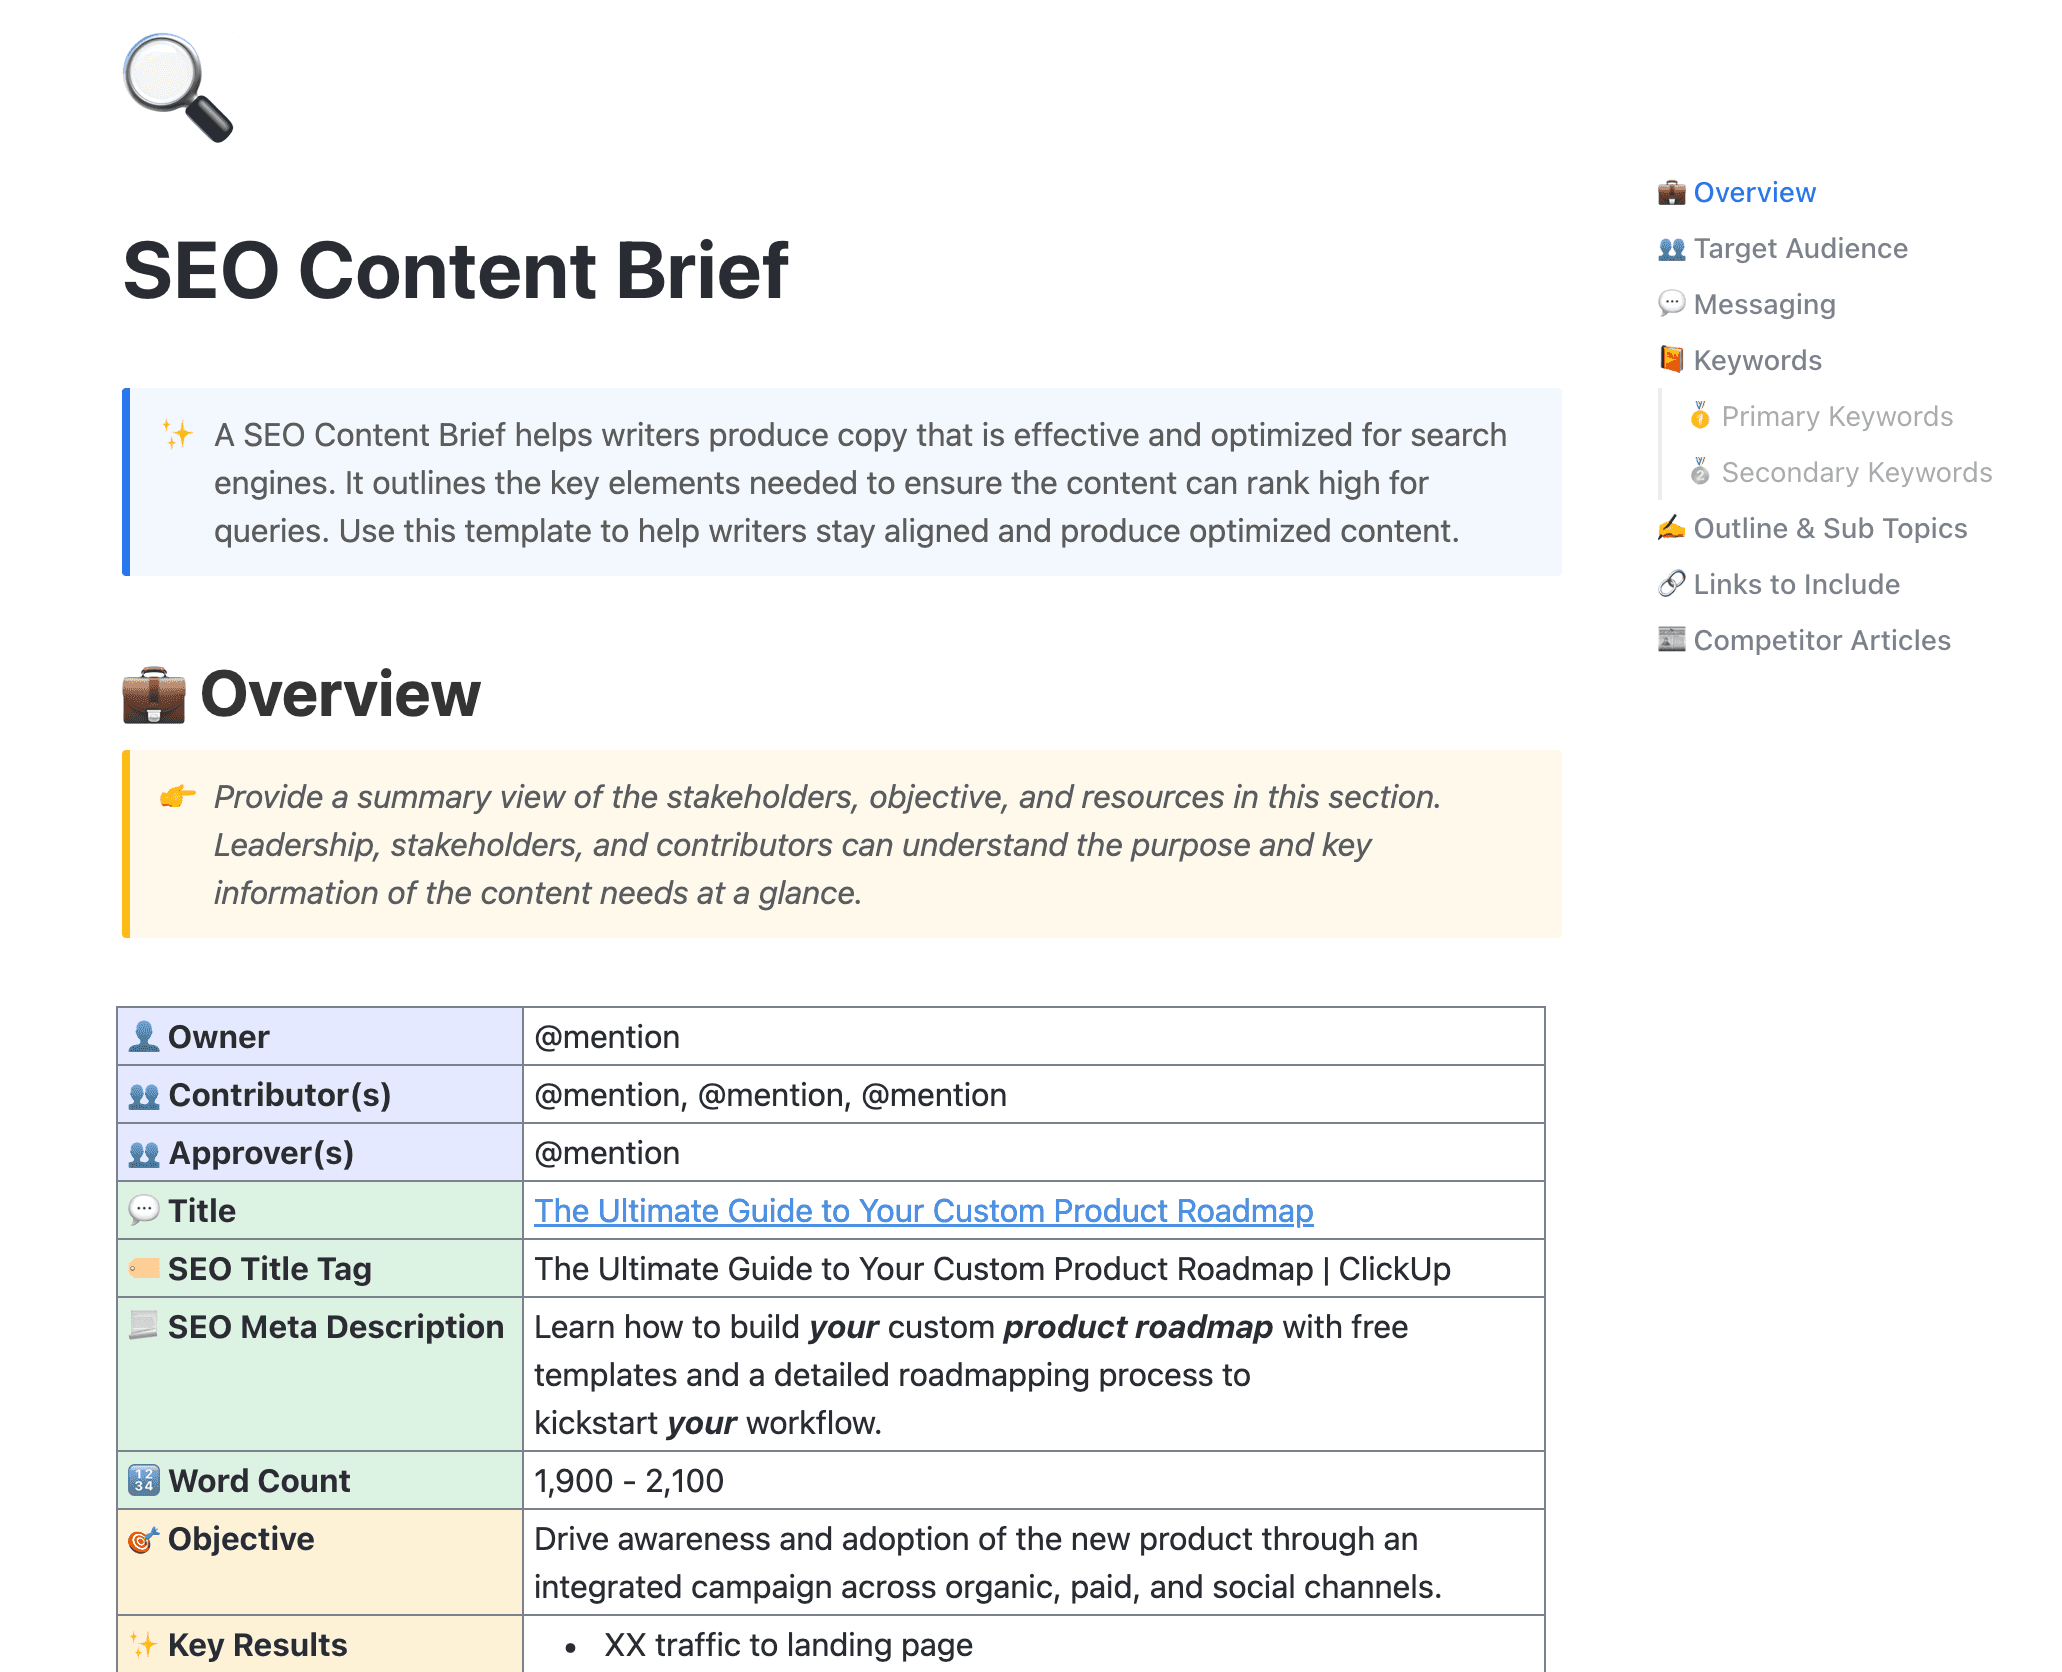 A SEO Content Brief helps writers produce copy that is effective and optimized for search engines. It outlines the key elements needed to ensure the content can rank high for queries. Use this template to help writers stay aligned and produce optimized content.